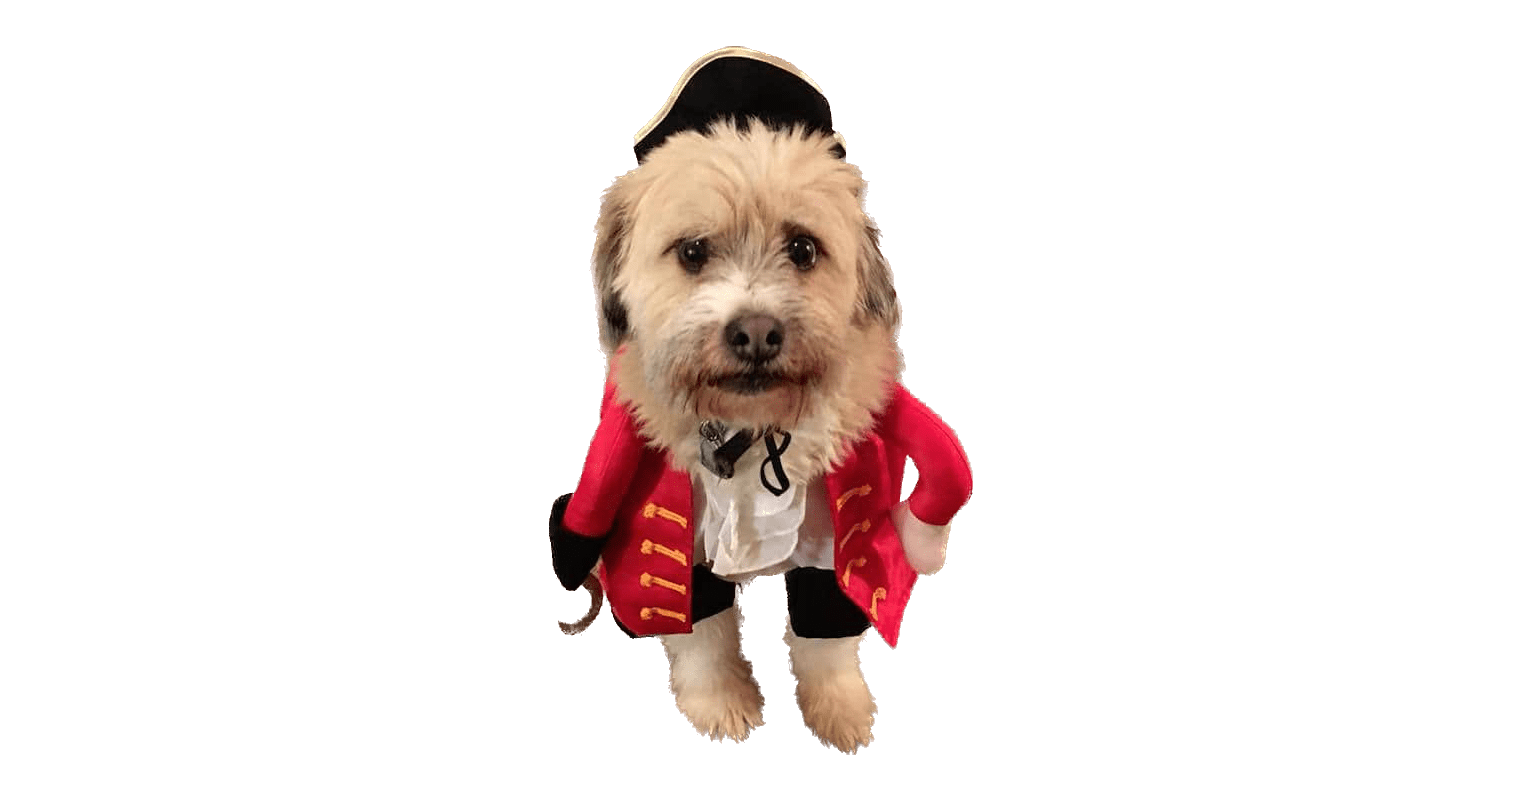 Costume parties, parades and contests for dogs this Halloween in